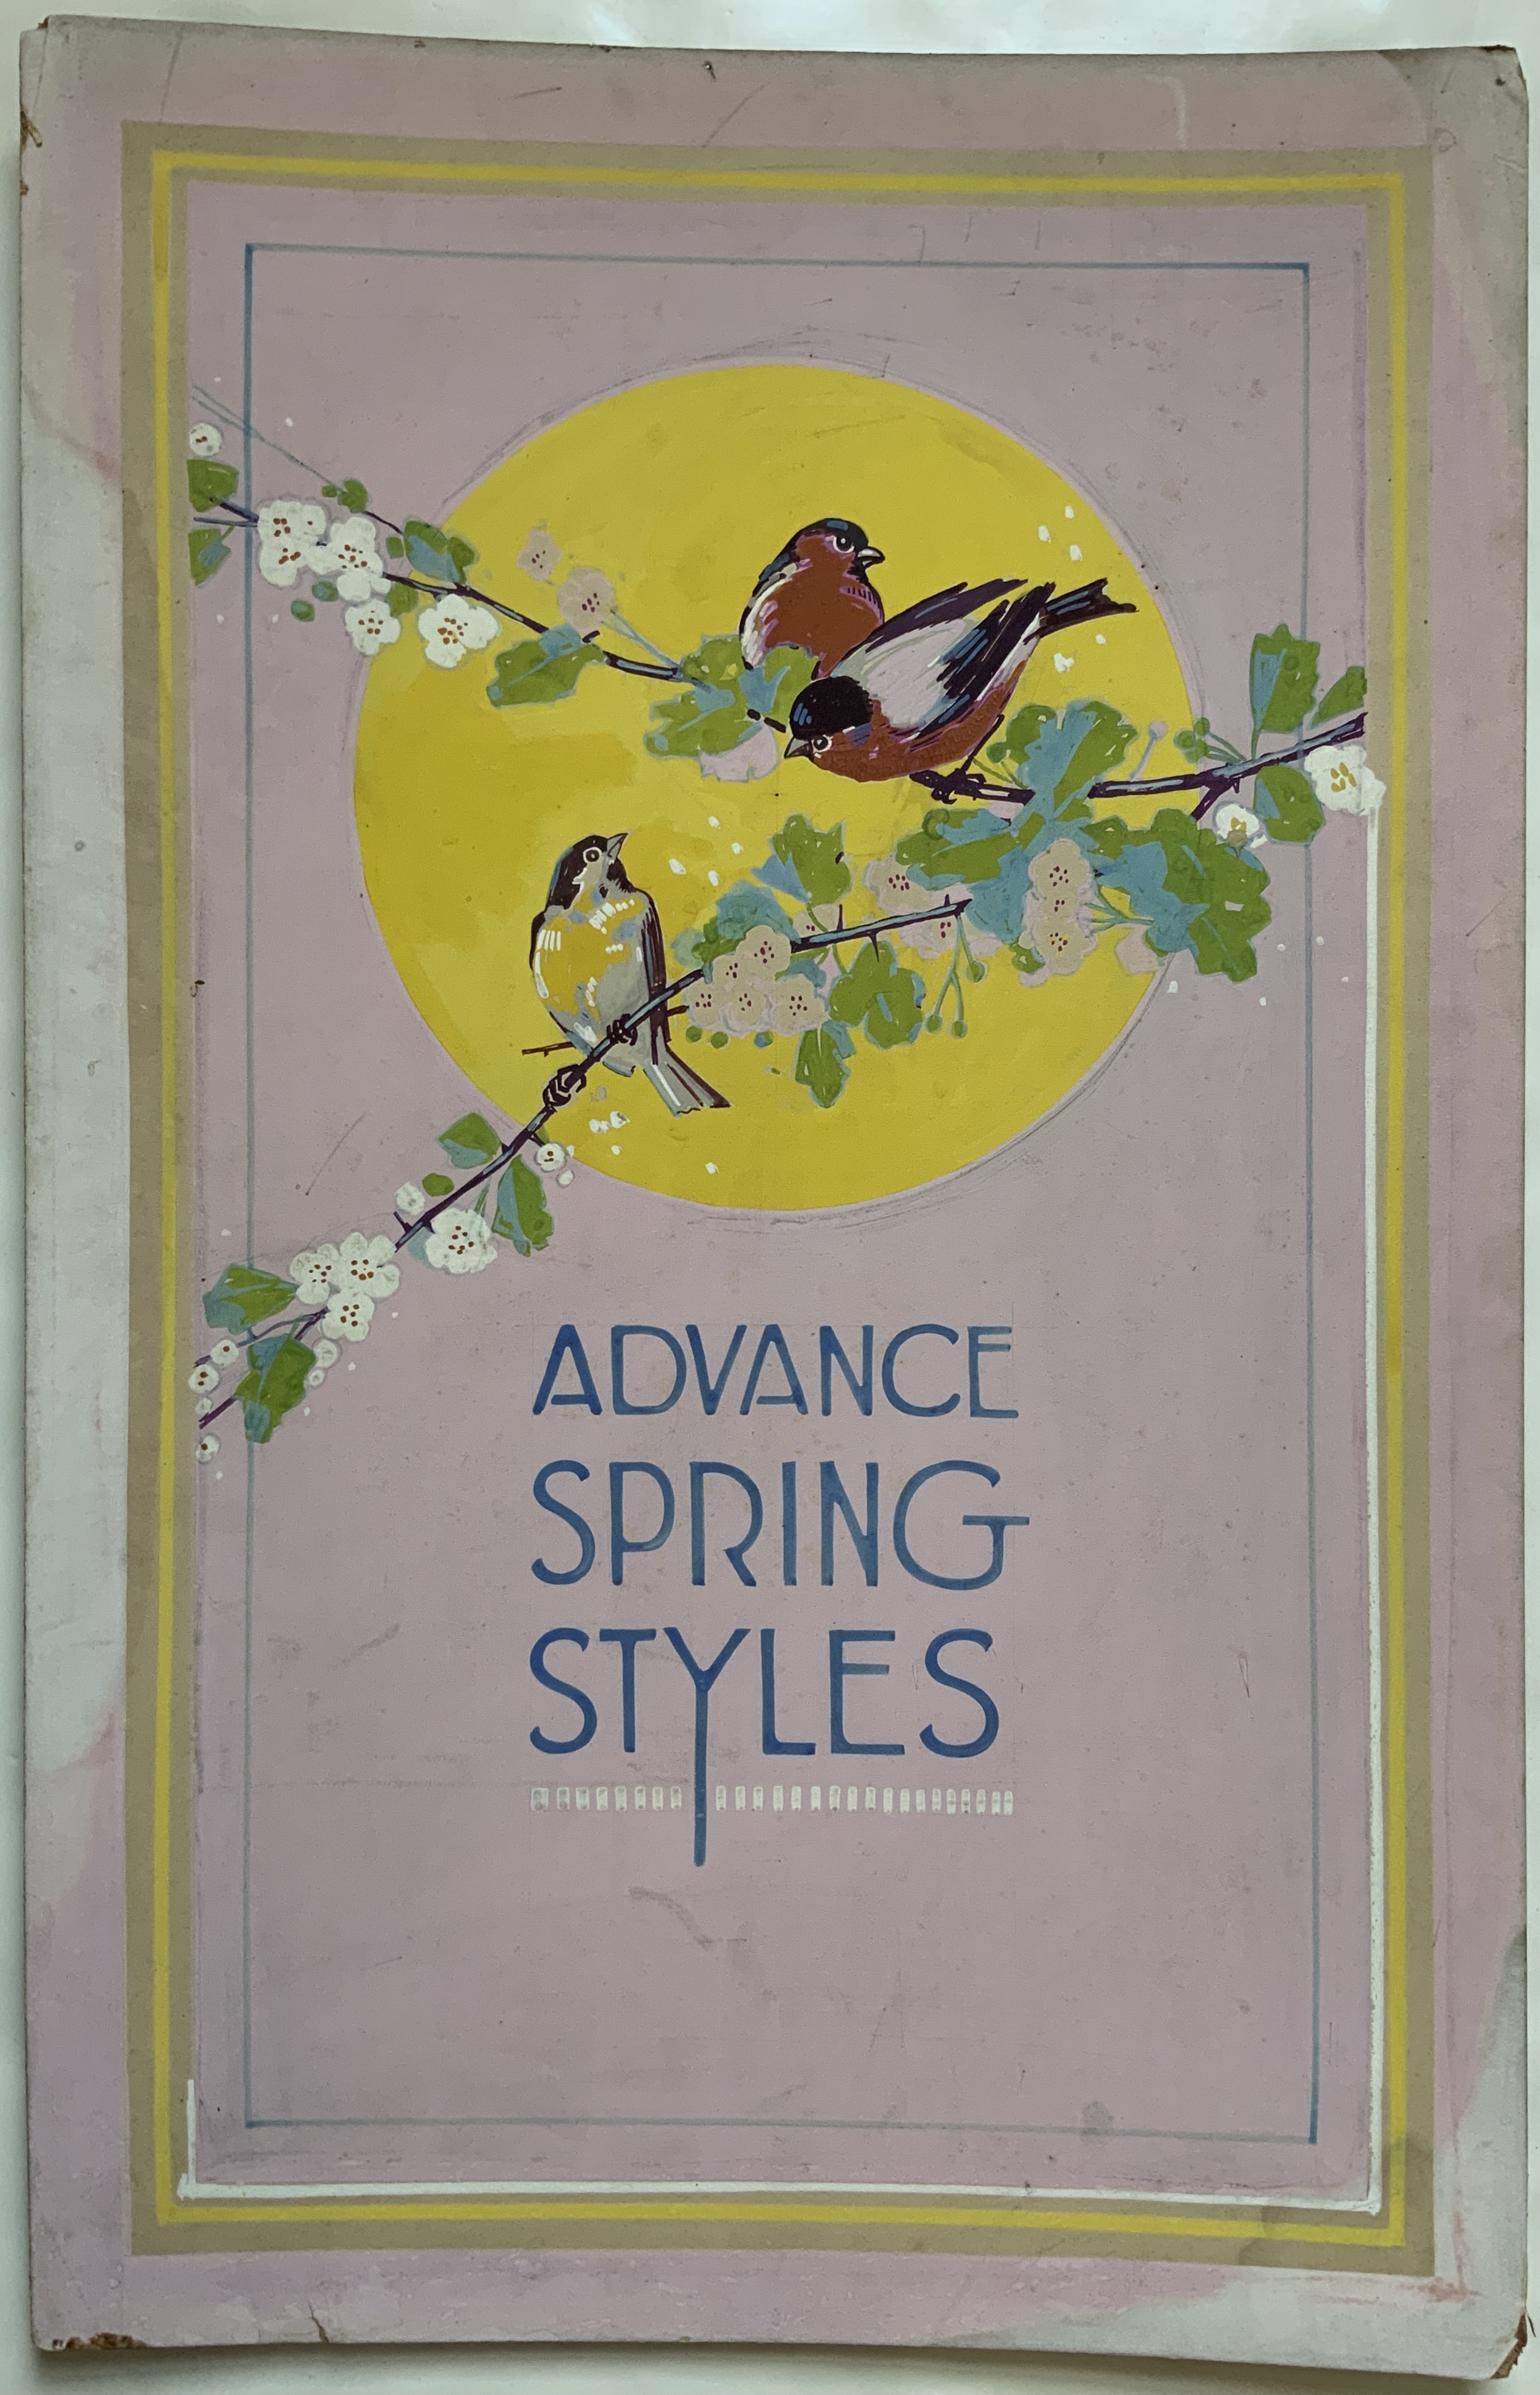 M42	ADVANCE SPRING STYLES - ORIGINAL ART FOR A DEPARTMENT STORE WINDOW